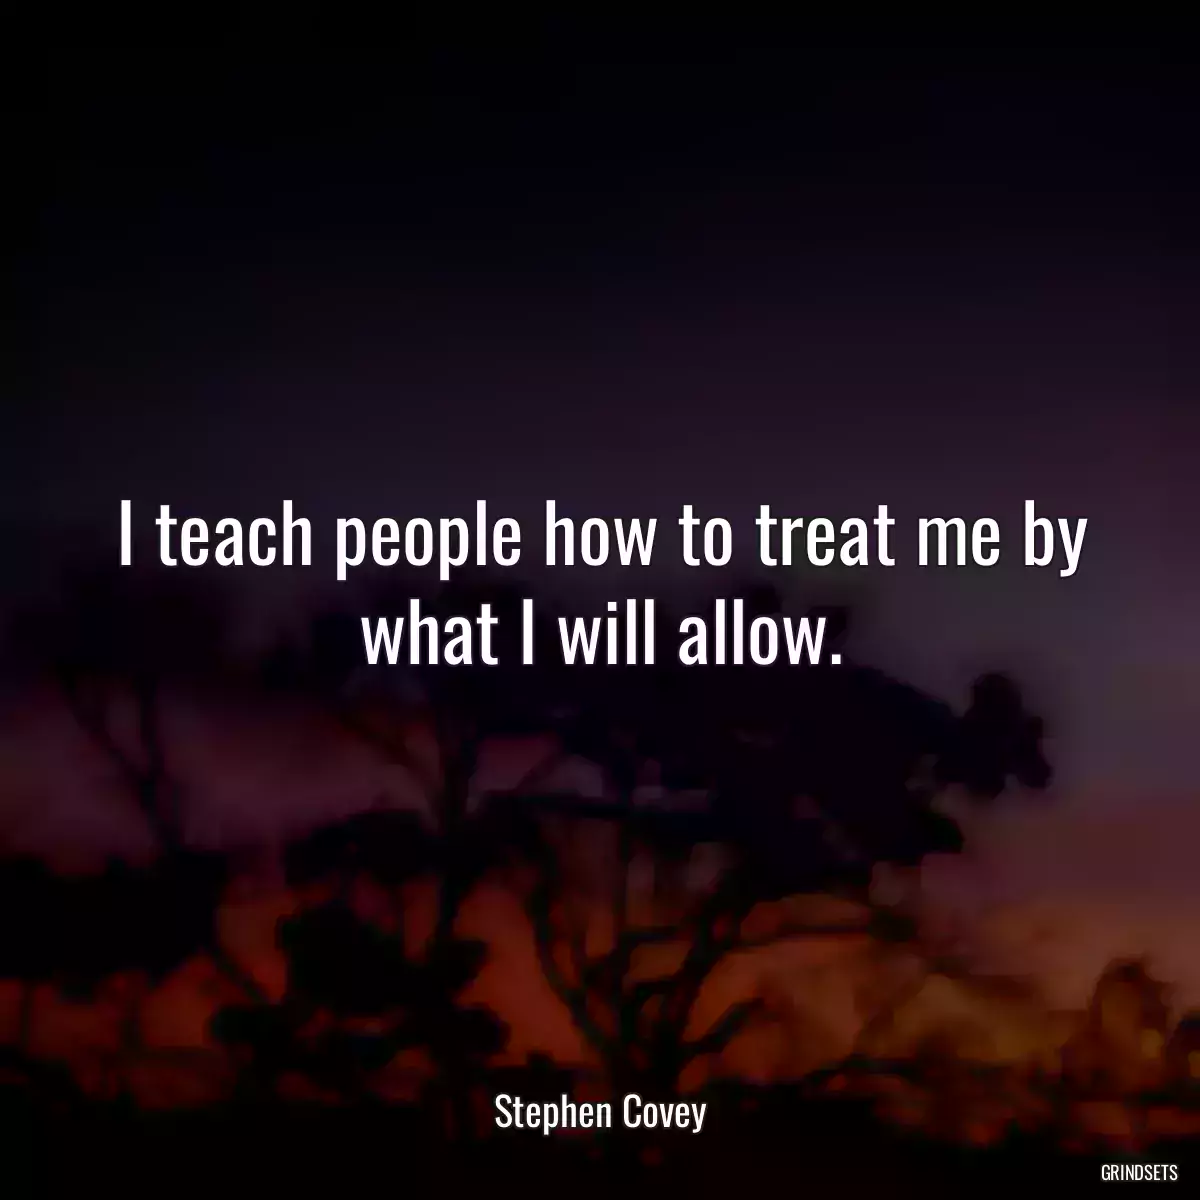 I teach people how to treat me by what I will allow.